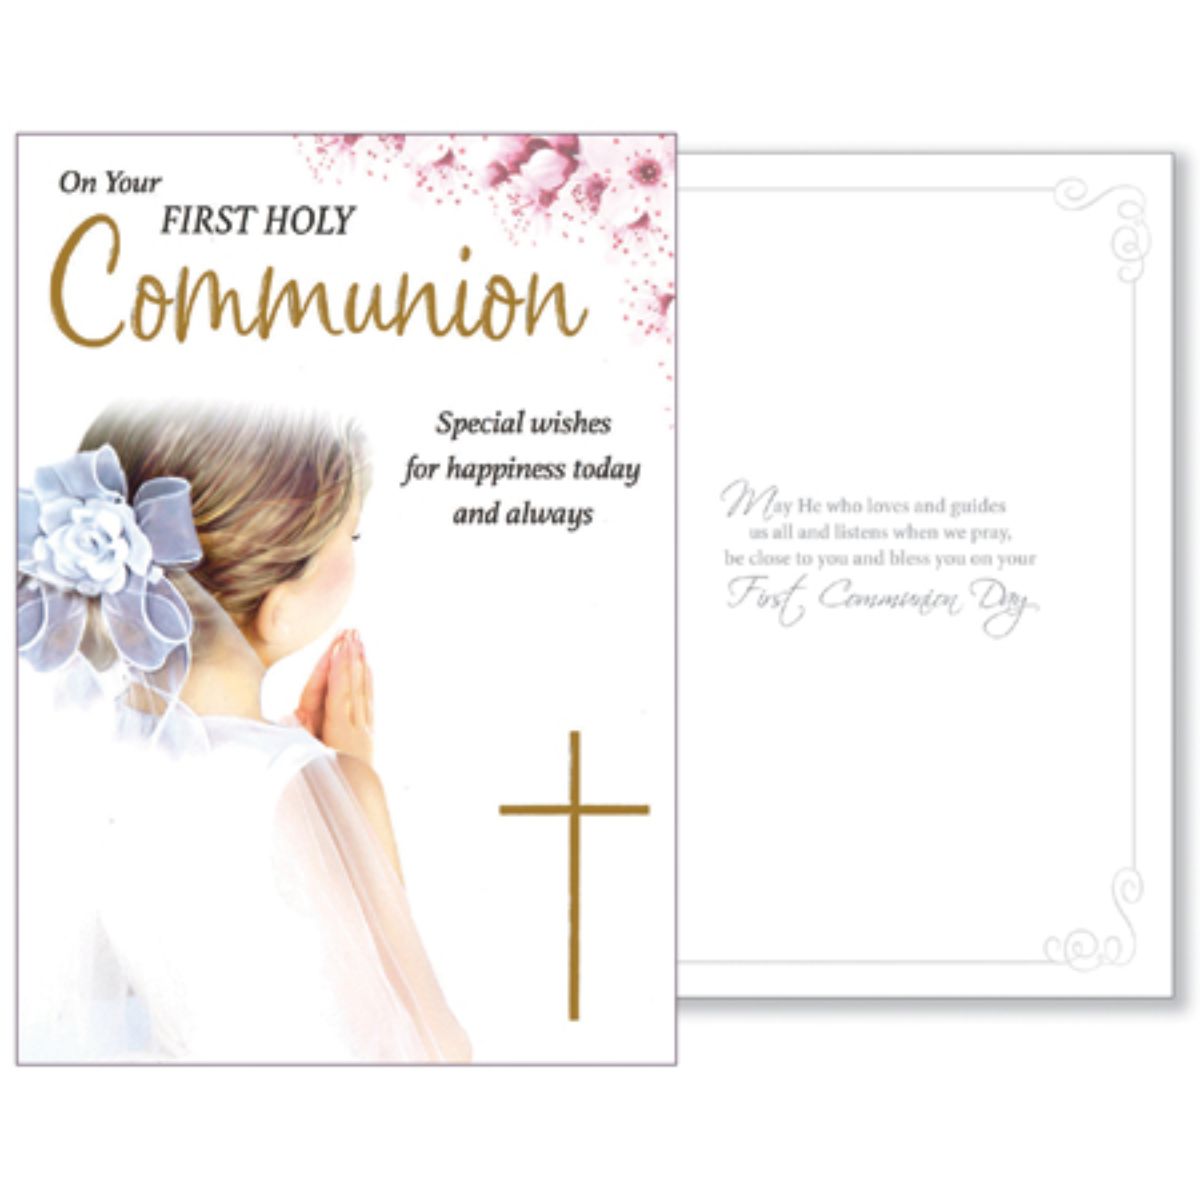 On Your First Holy Communion Special Wishes Greetings Card For A Girl